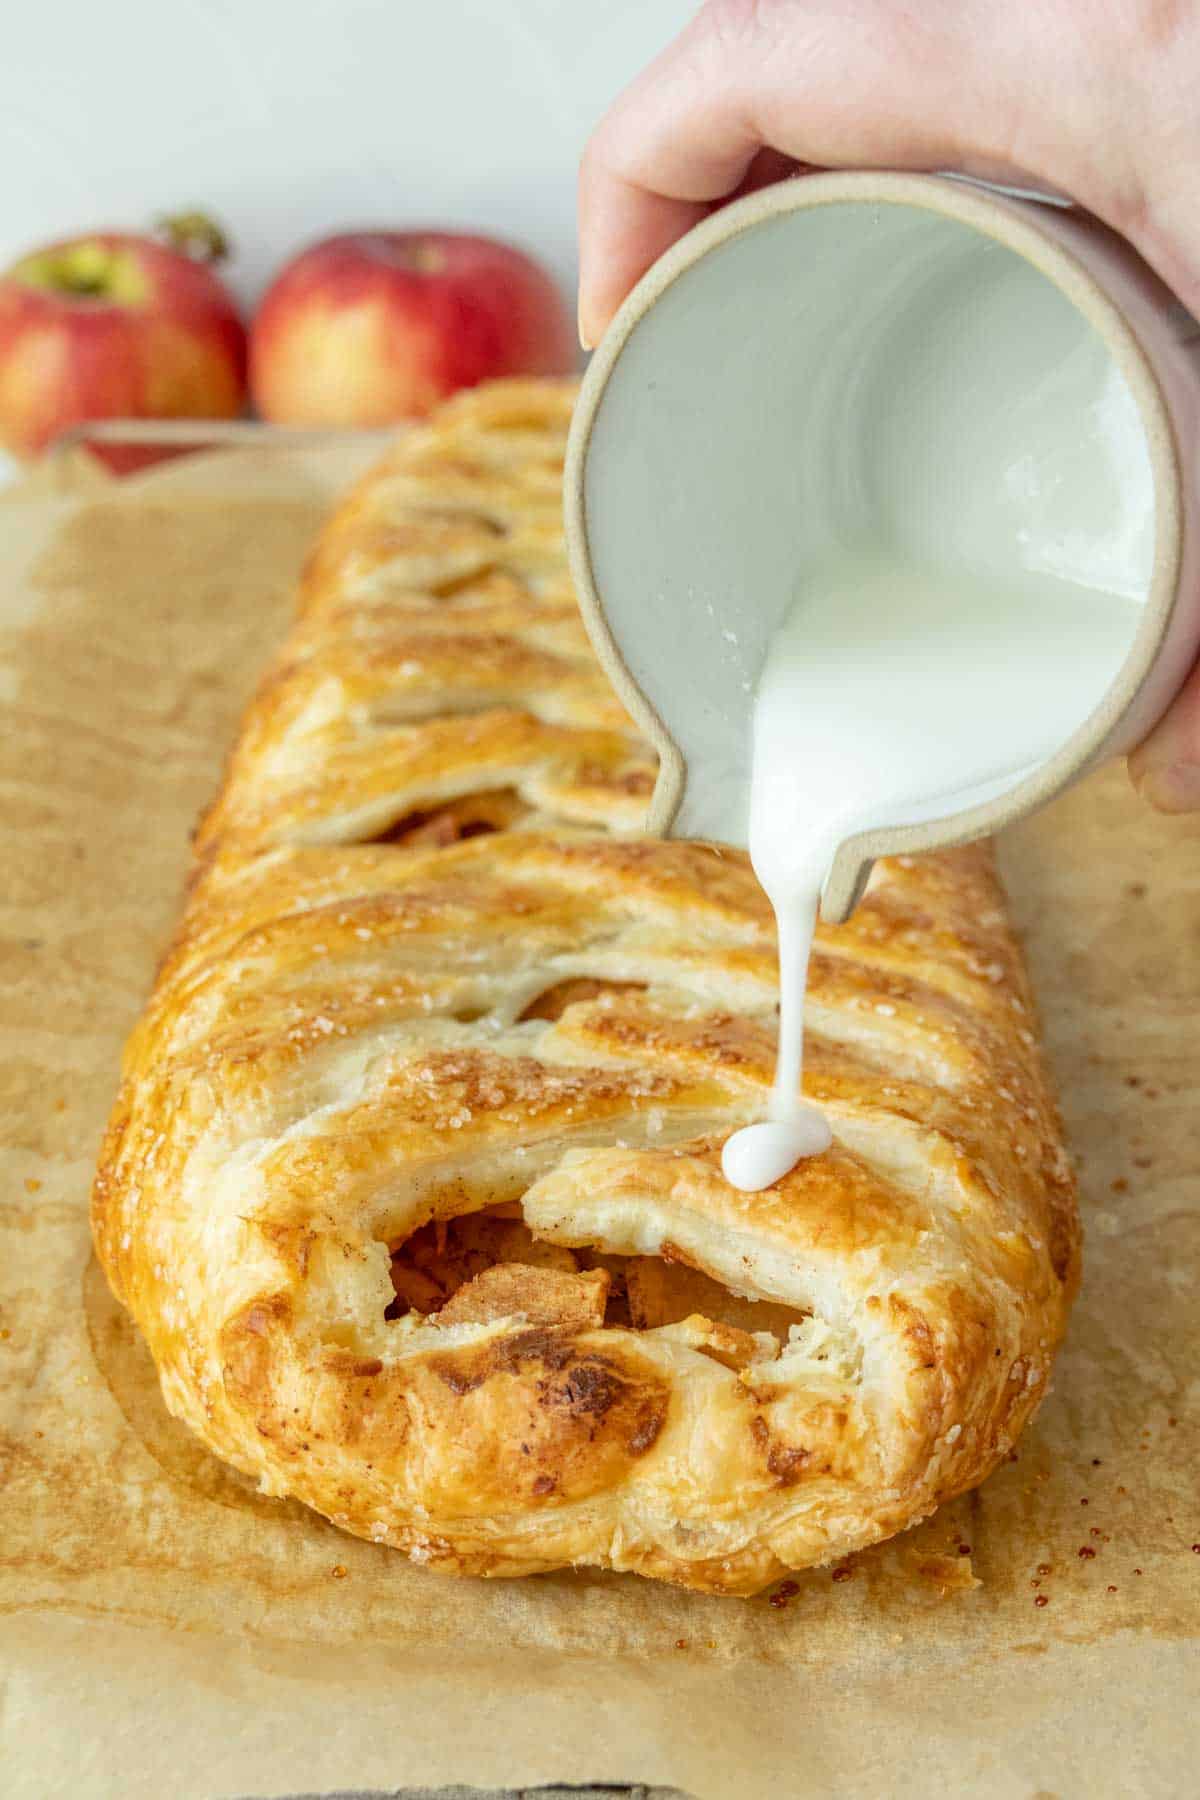 A person pouring icing onto an apple pastry.